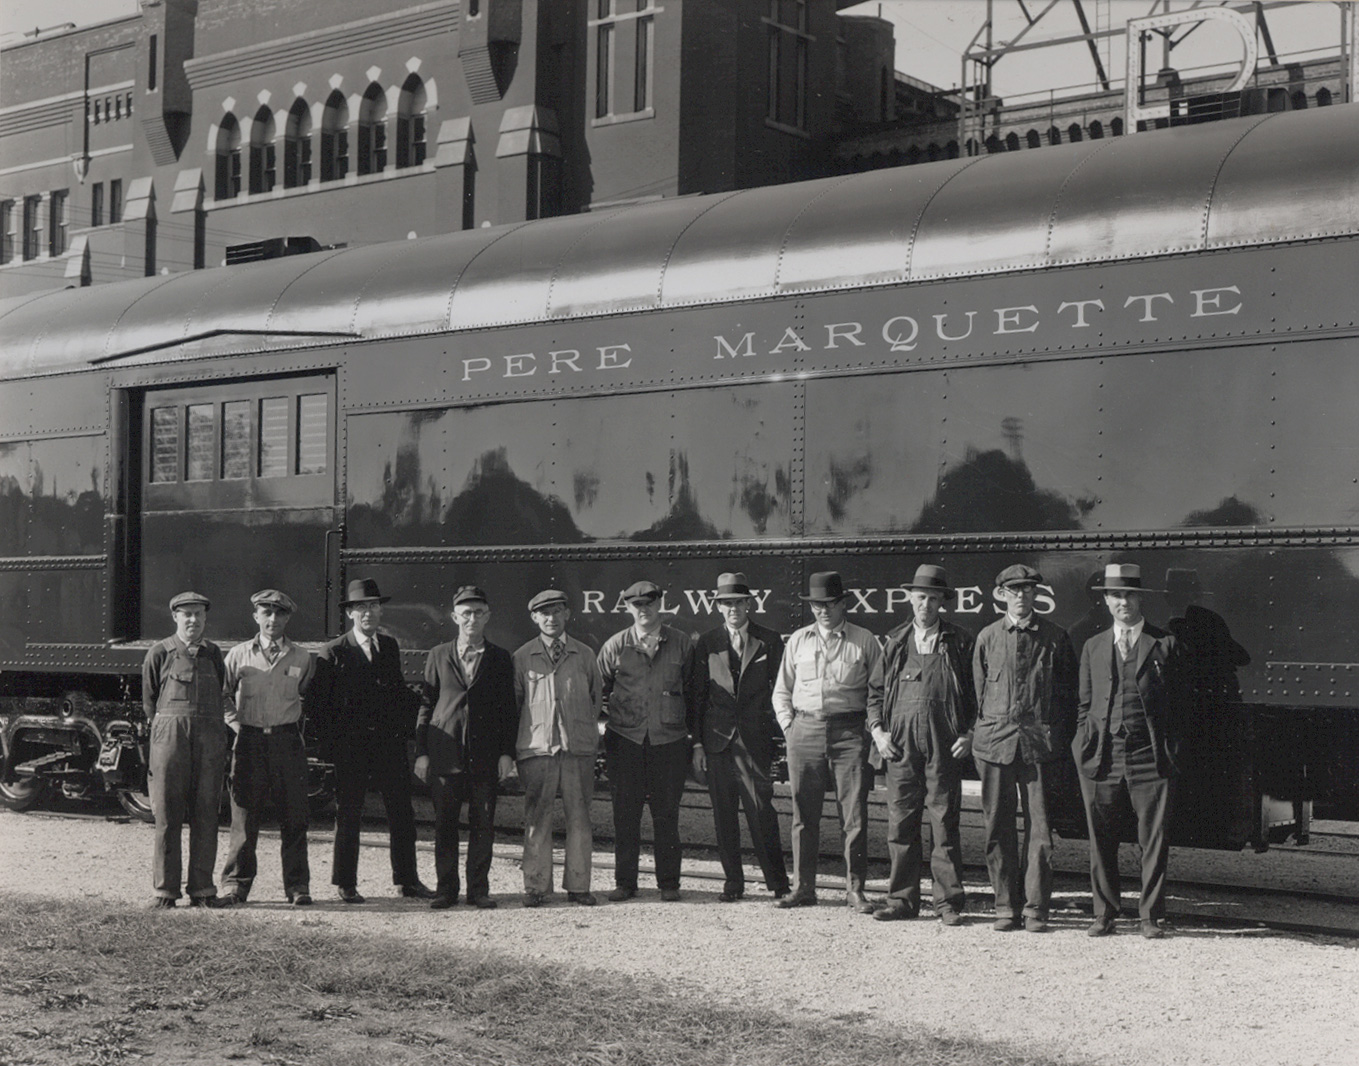  This photo is believed to be taken right after an inspection of a rail car ordered by the Pere Marquette rail line. &nbsp;The men pictured were likely foremen involved in its production. &nbsp;The man on the right is believed to be a representative 